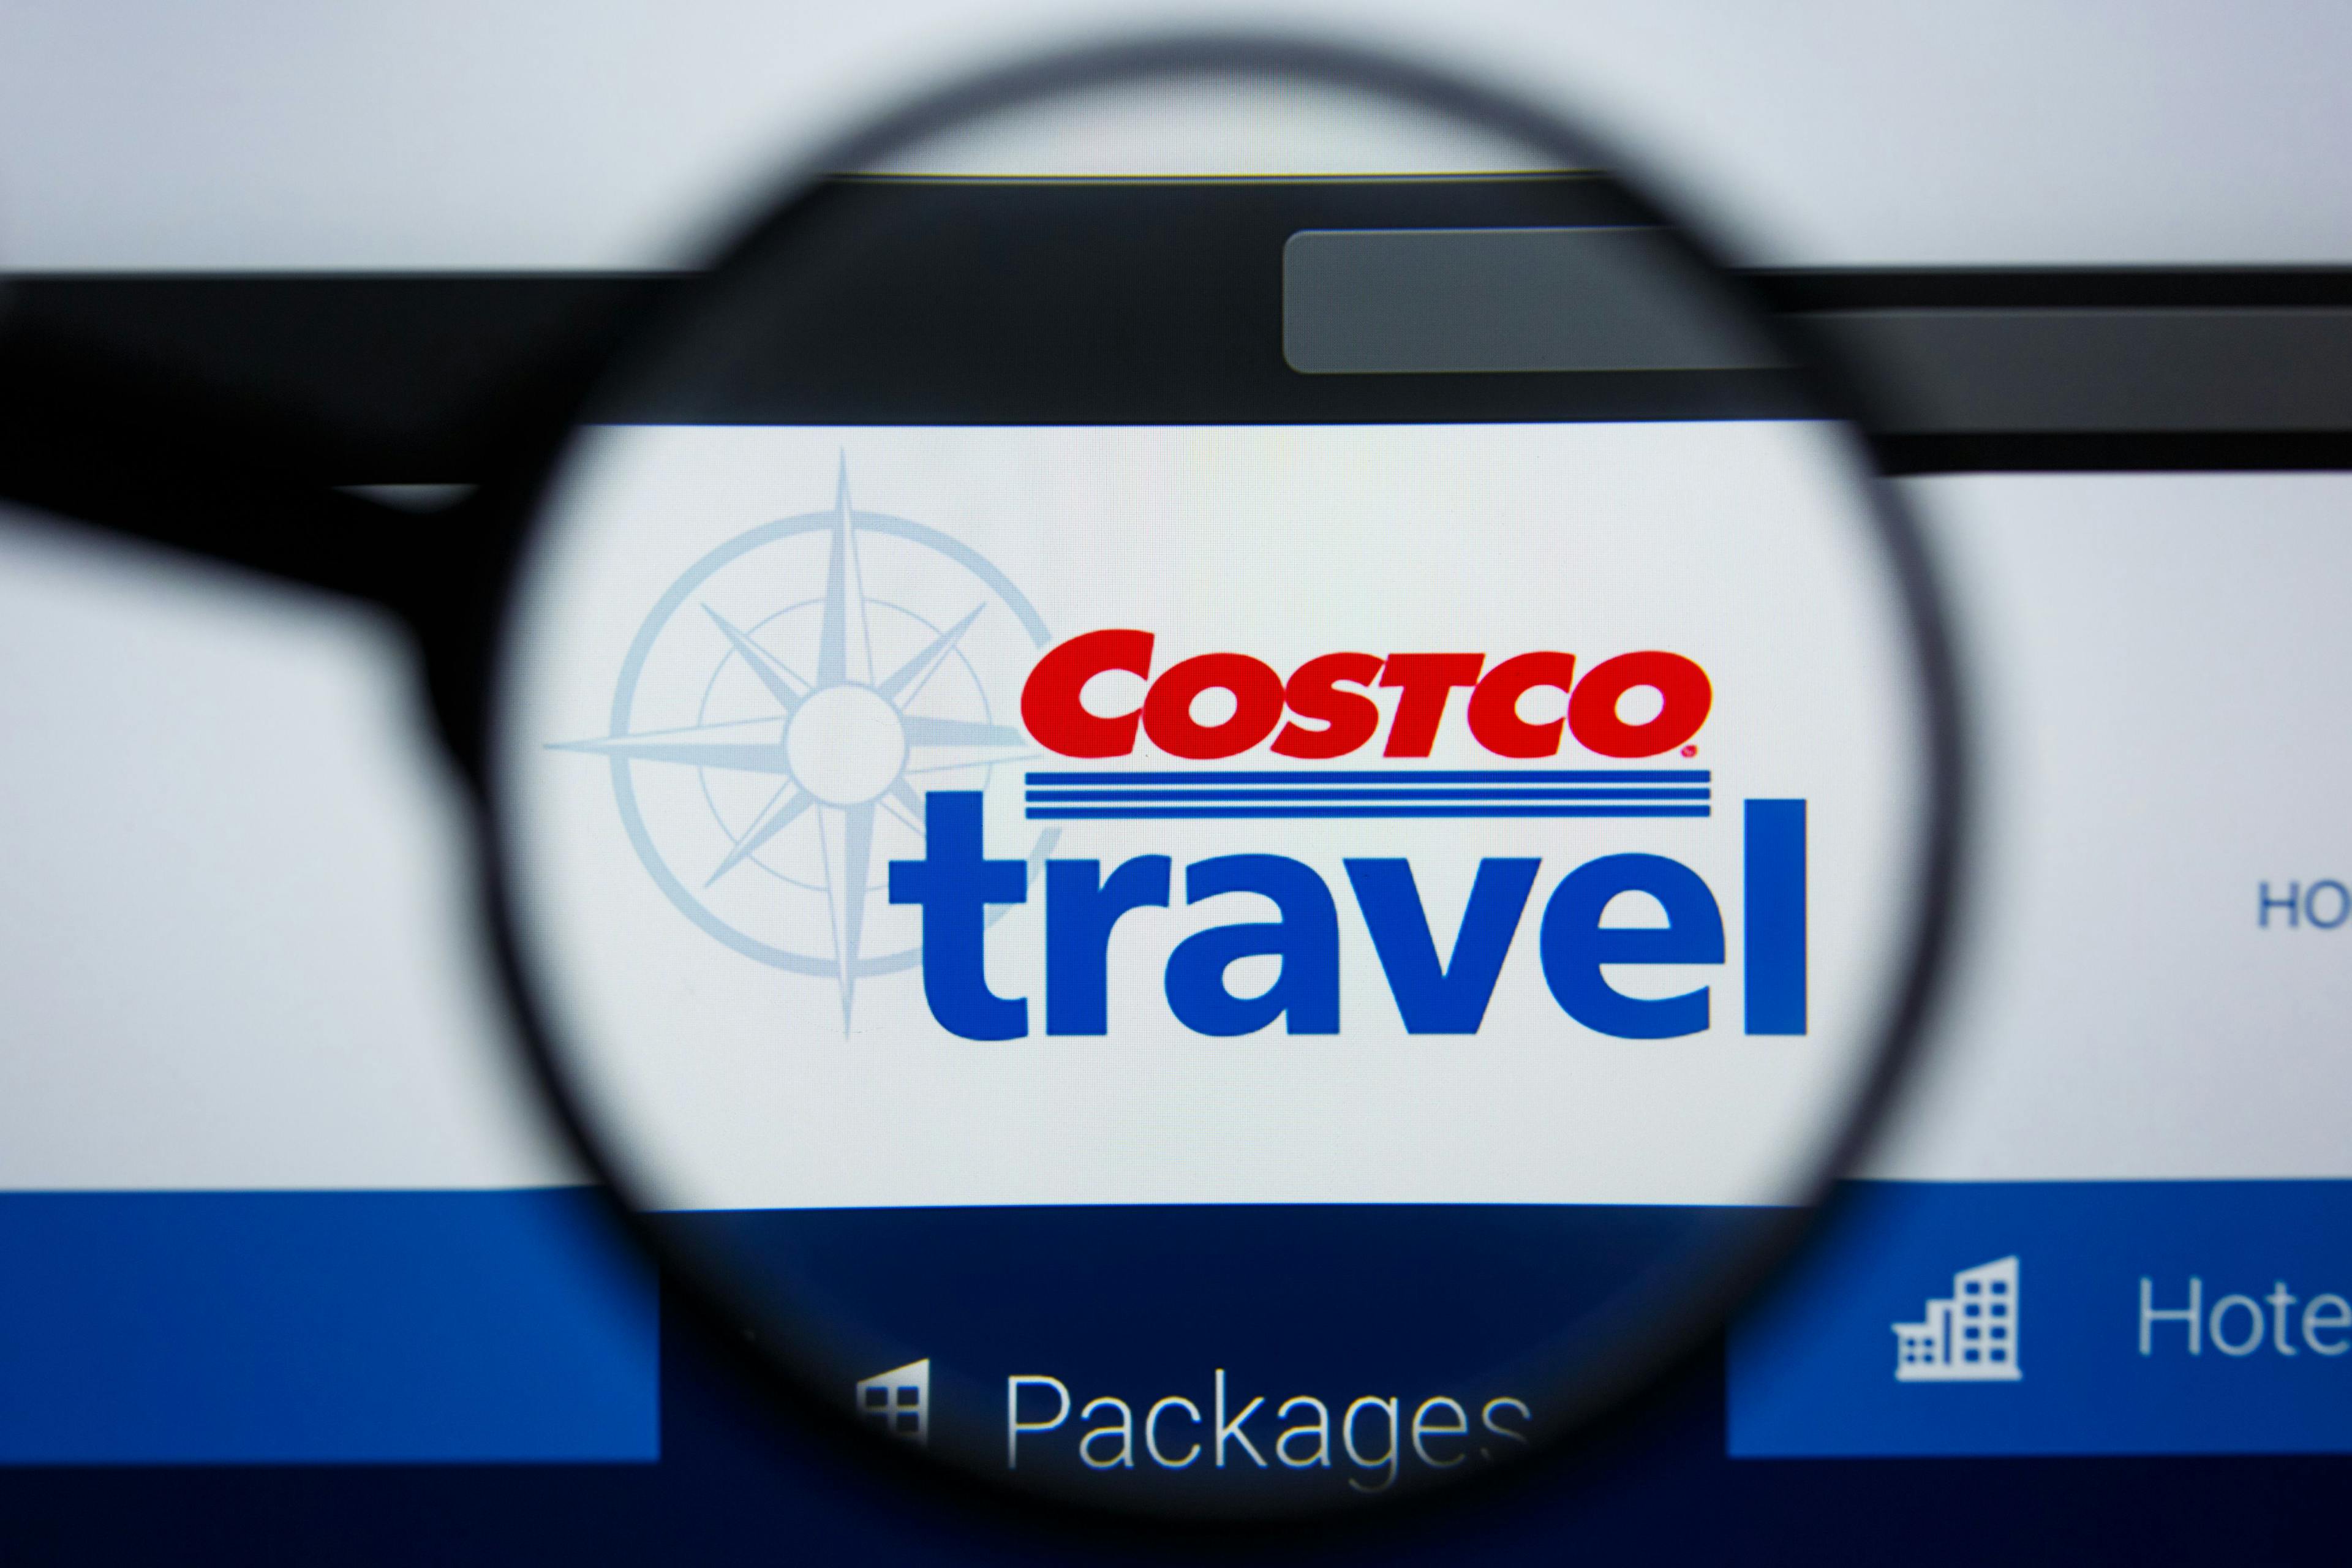 Best Travel Sites for Packages - Costco Travel - ratepunk 